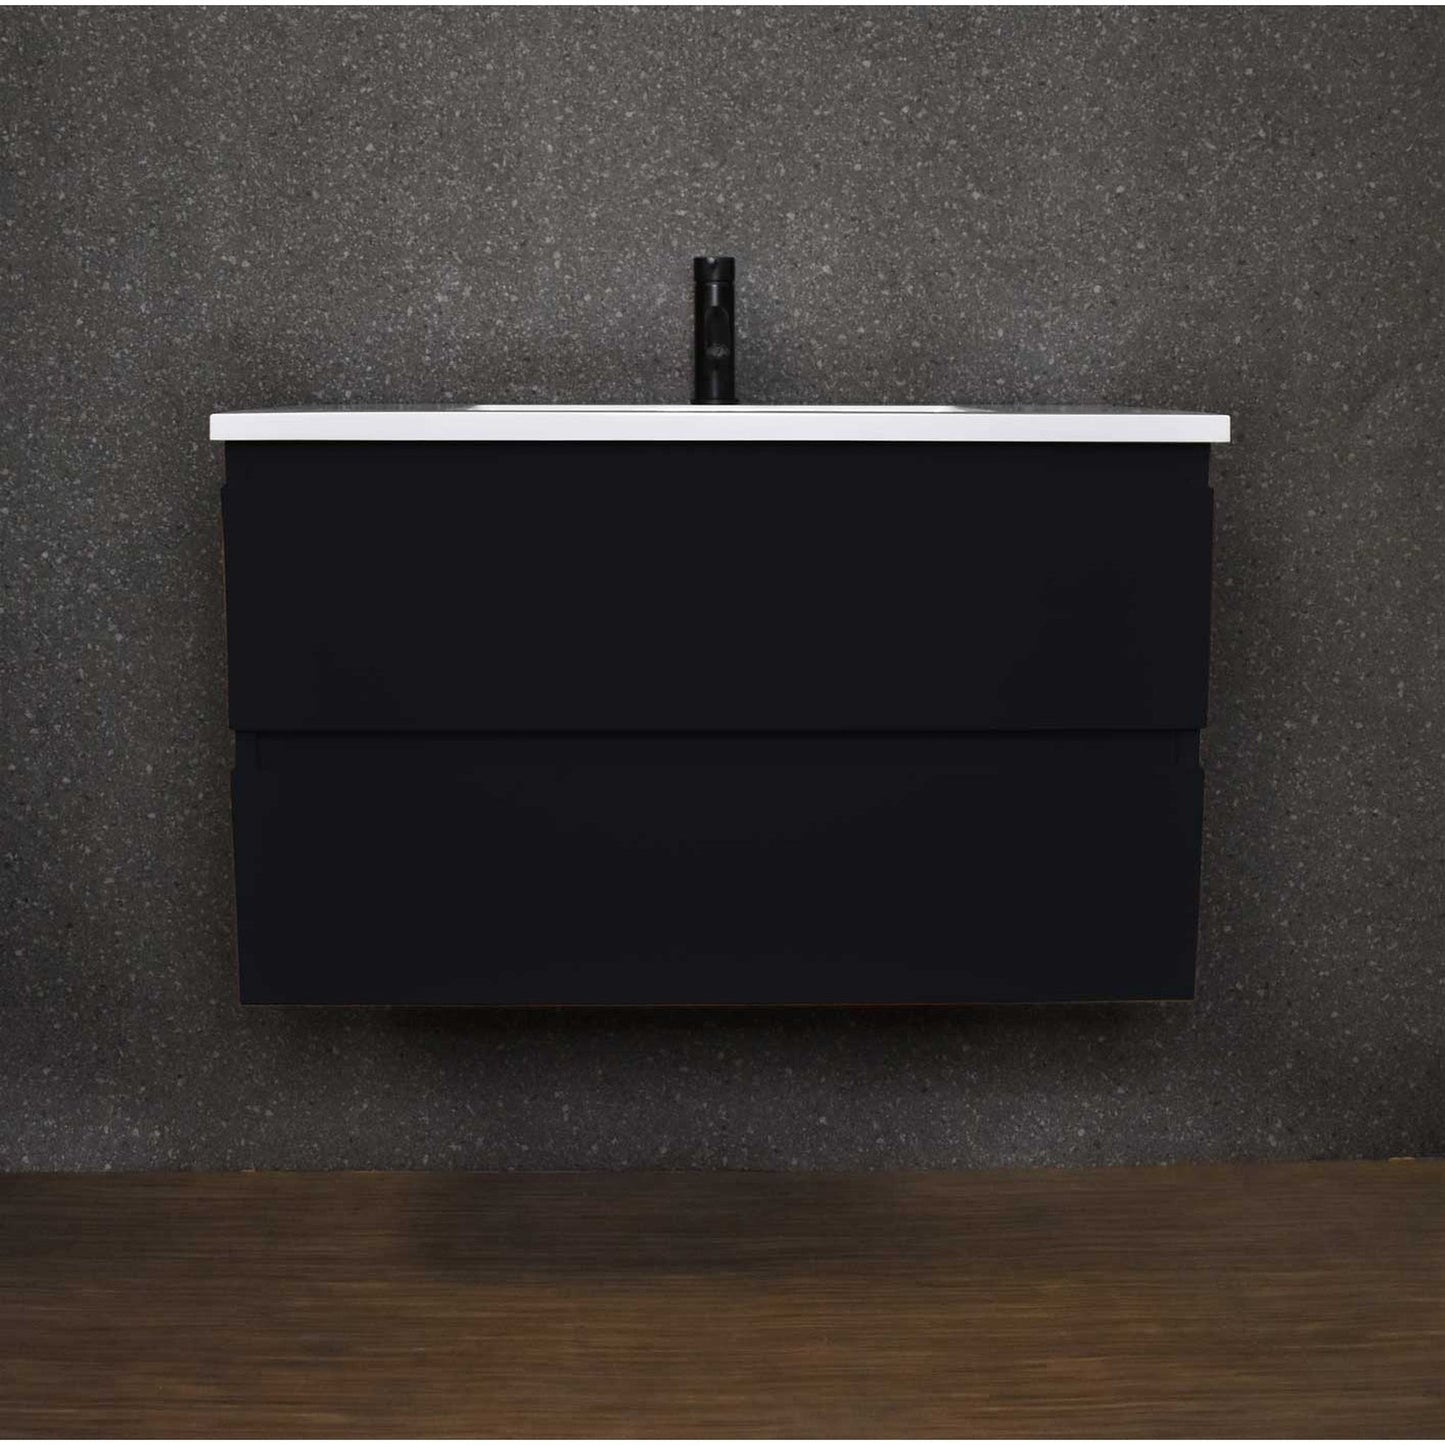 Volpa USA Salt 36" x 20" Black Wall-Mounted Floating Bathroom Vanity With Drawers, Acrylic Top and Integrated Acrylic Sink